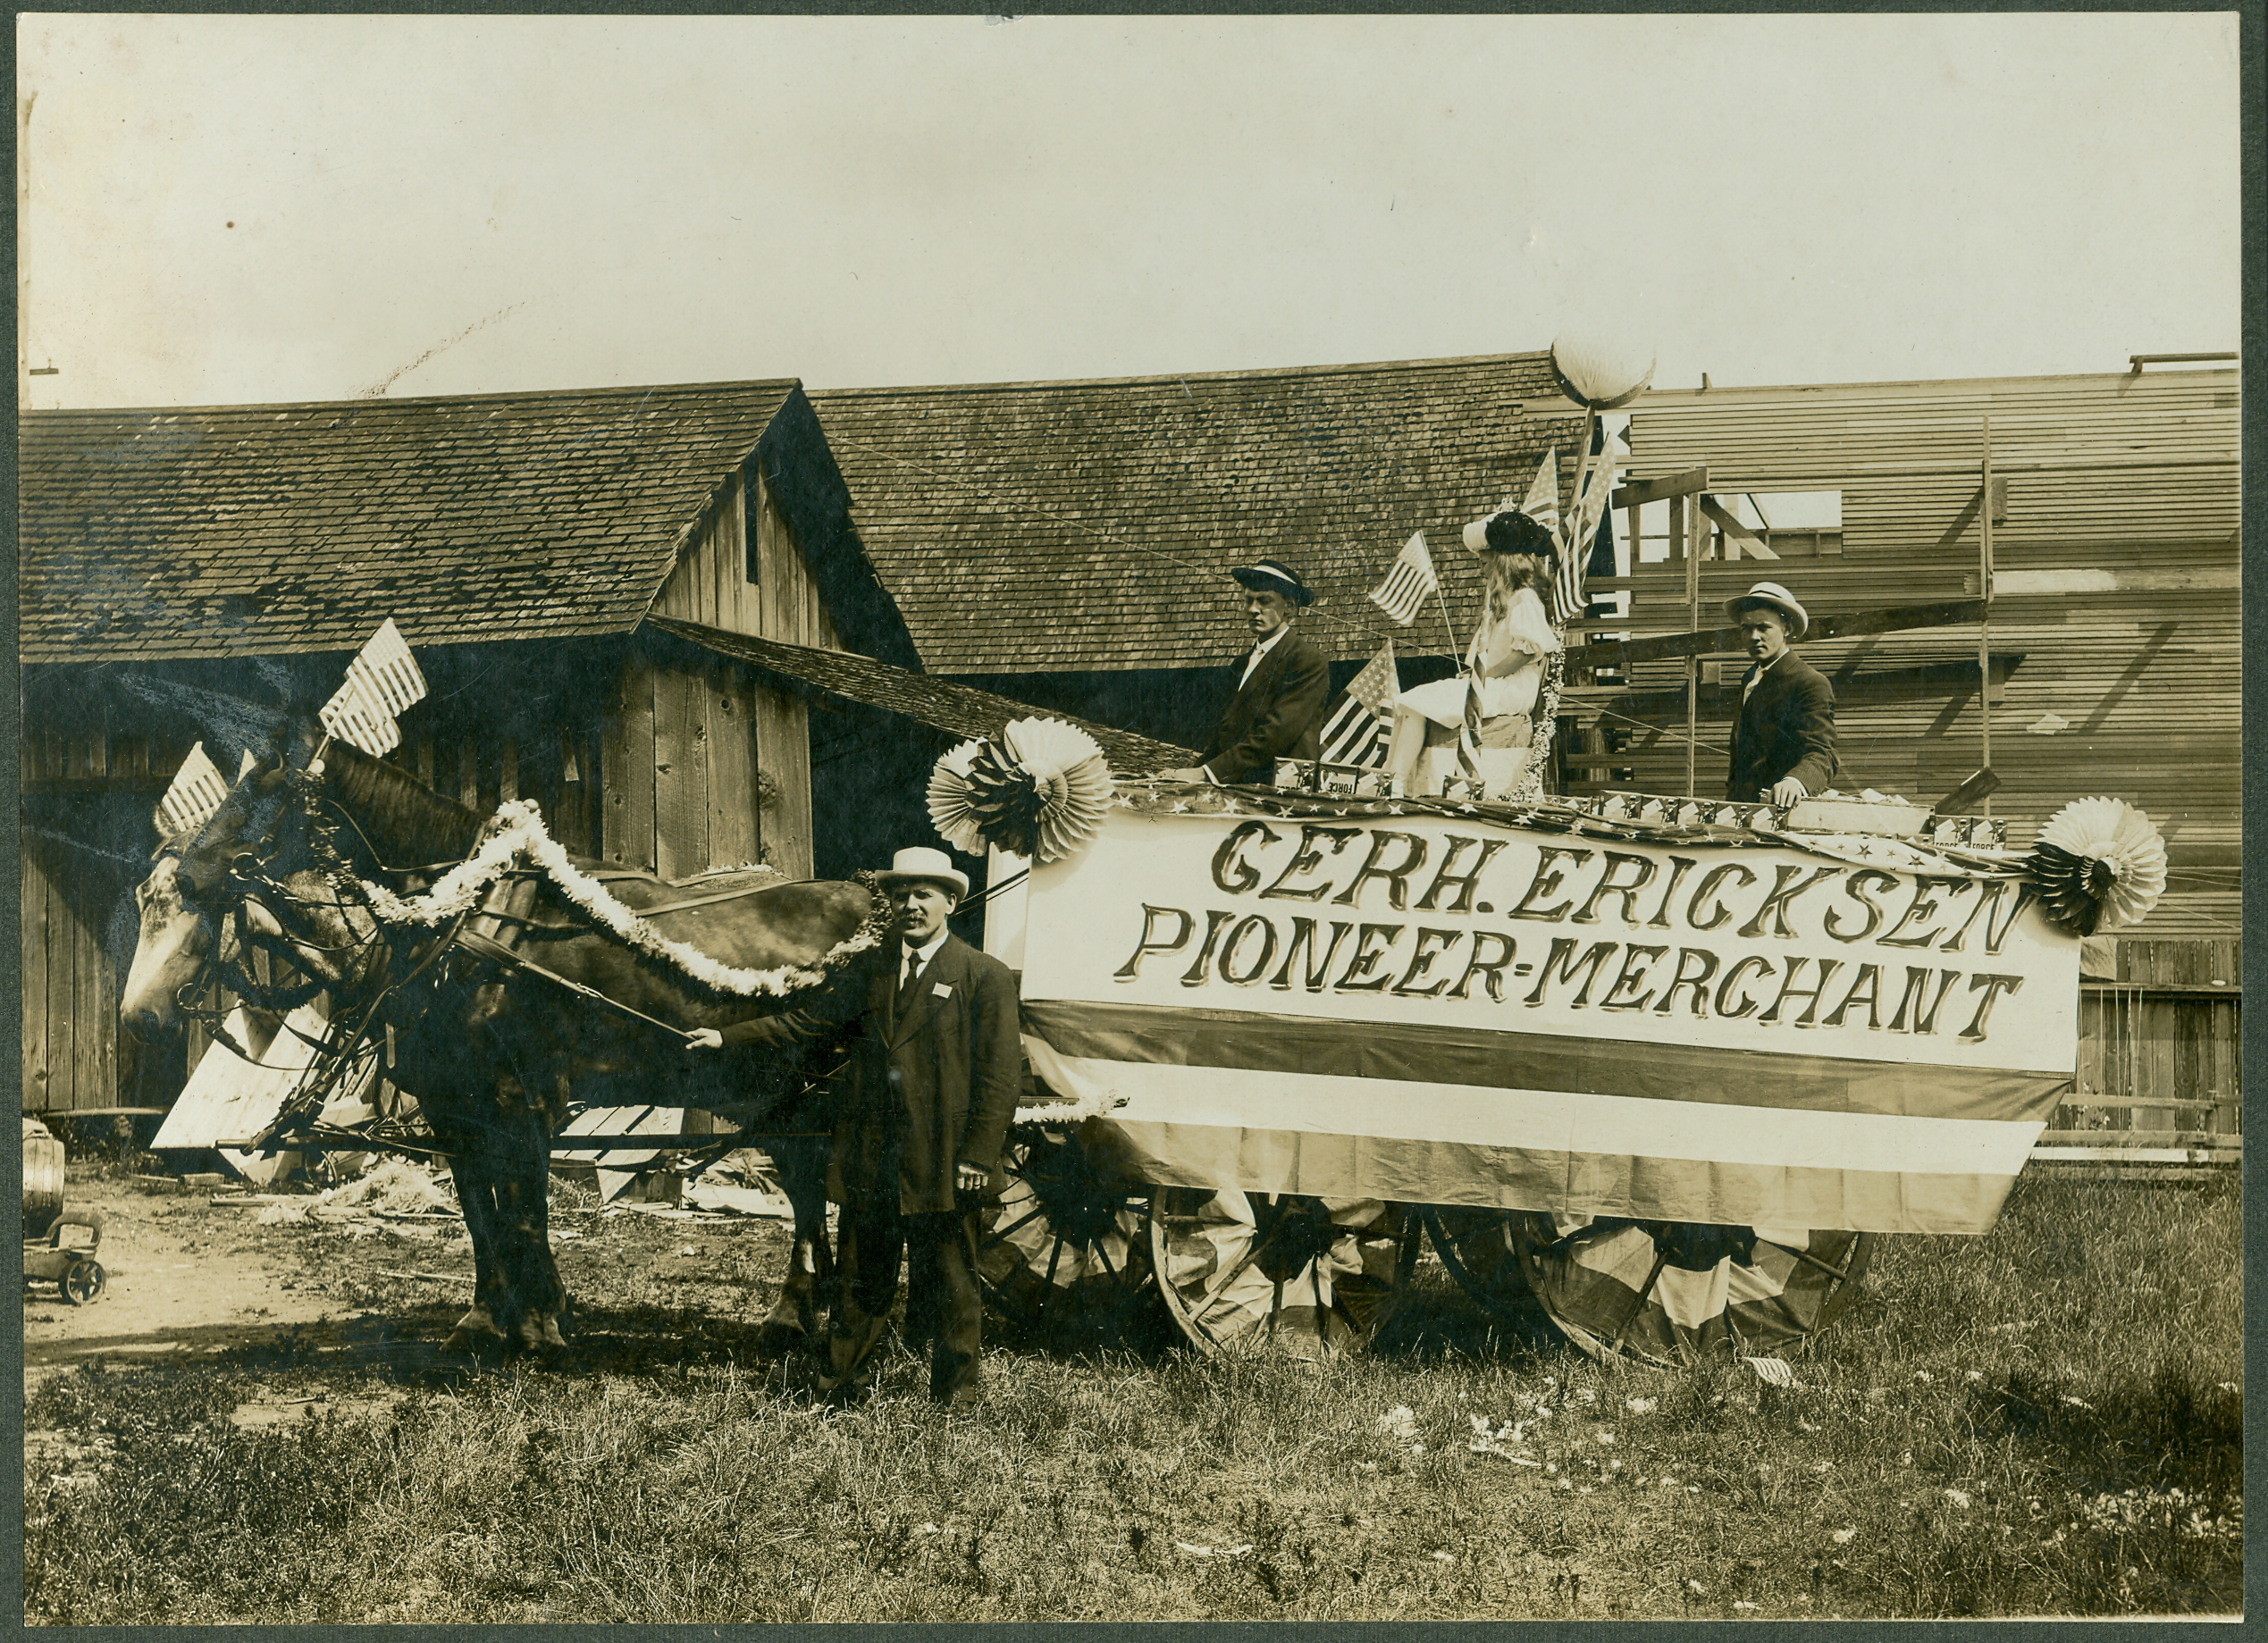 The Bothell July 4th parade float for Gerhard Ericksen's Mercantile Store on Main Street. The sign on the side of the float reads "Gerh. Ericksen Pioneer Merchant." Background for the picture is not identified. Those in the picture, according to a caption on the back of the photo, are left to right, Gerhard Ericksen, driver Lars Eidbo, unidentified person, and George Ericksen (Gerhard's son).